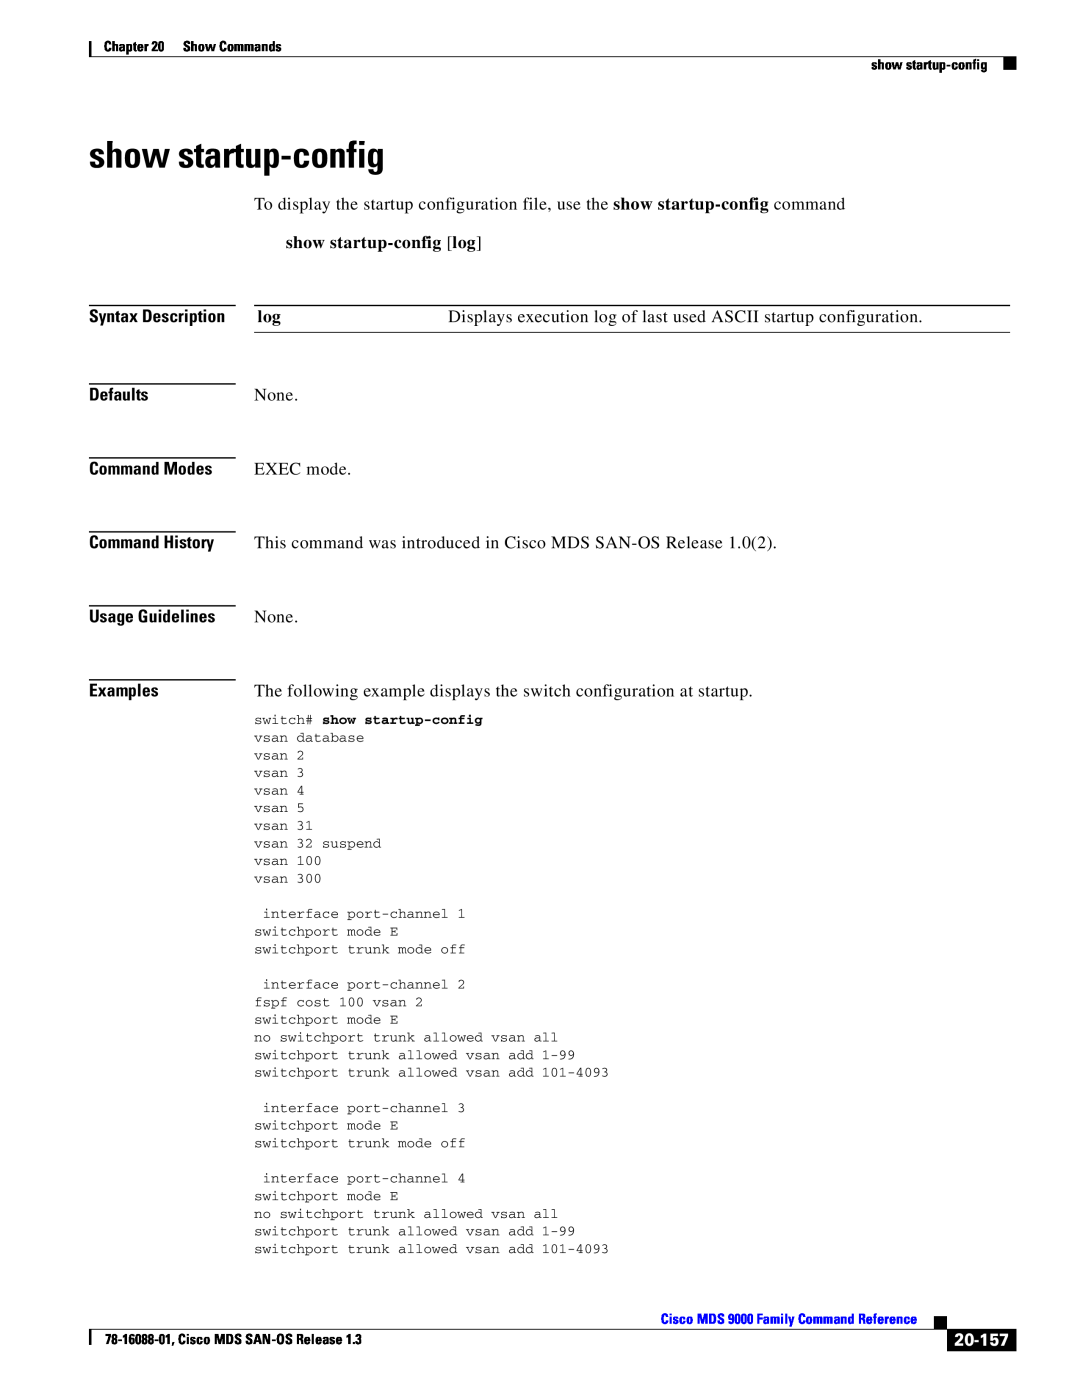 Cisco Systems MDS 9000 manual show startup-config, Displays execution log of last used ASCII startup configuration, 20-157 